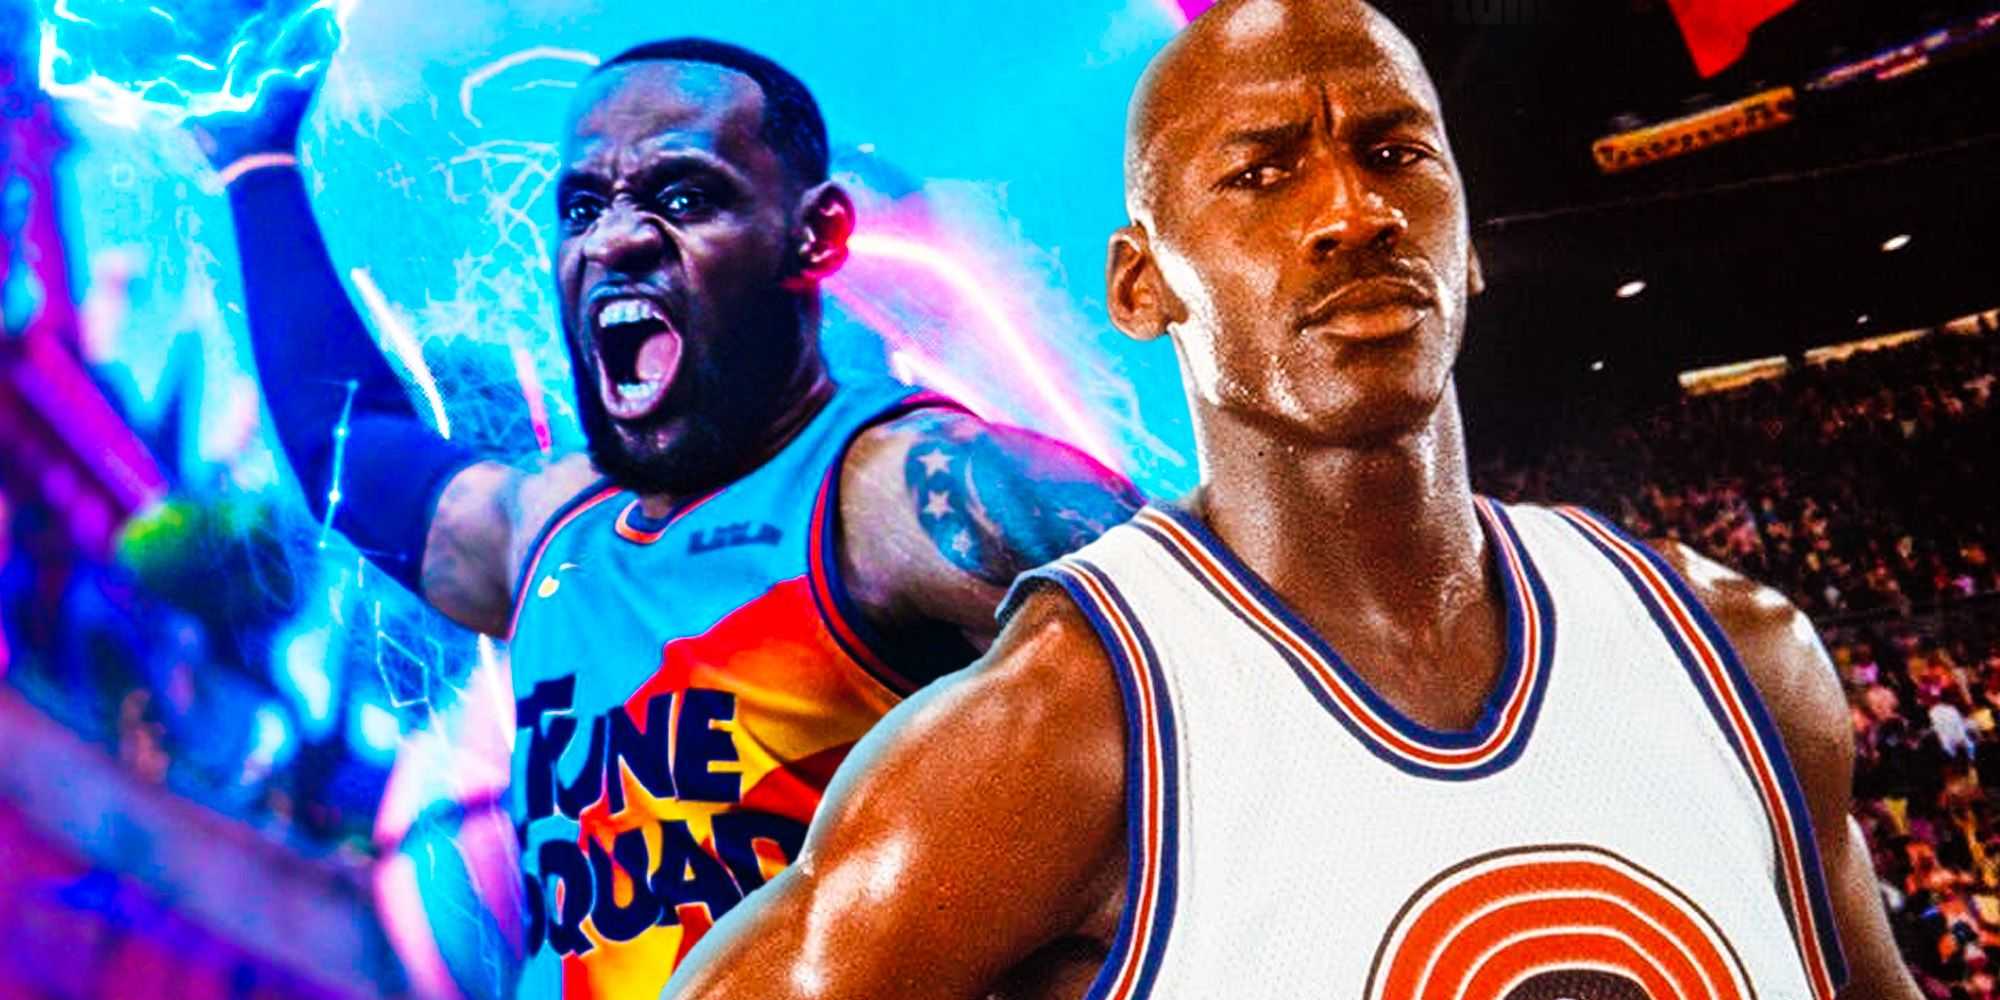 Space Jam: A New Legacy' review: LeBron James lost in CGI mess